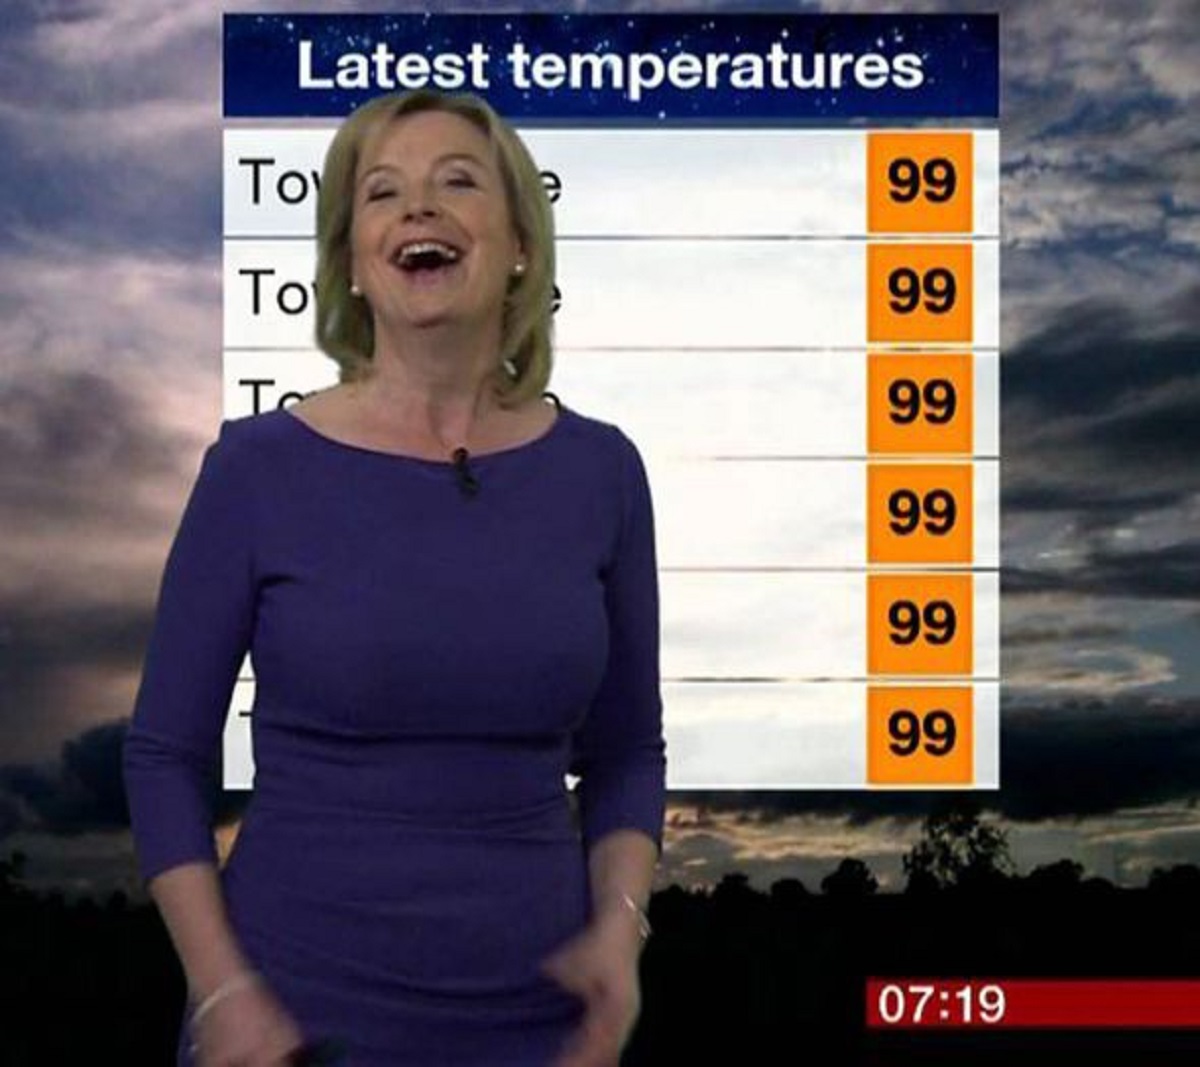 In 2014, BBC weather presenter Carol Kirkwood amused viewers by mistakenly forecasting 99 degrees "somewhere and everywhere." Kirkwood explained it as a clicker mishap, turning the incident into a permanent highlight in her career. Live TV proves even seasoned professionals can err.